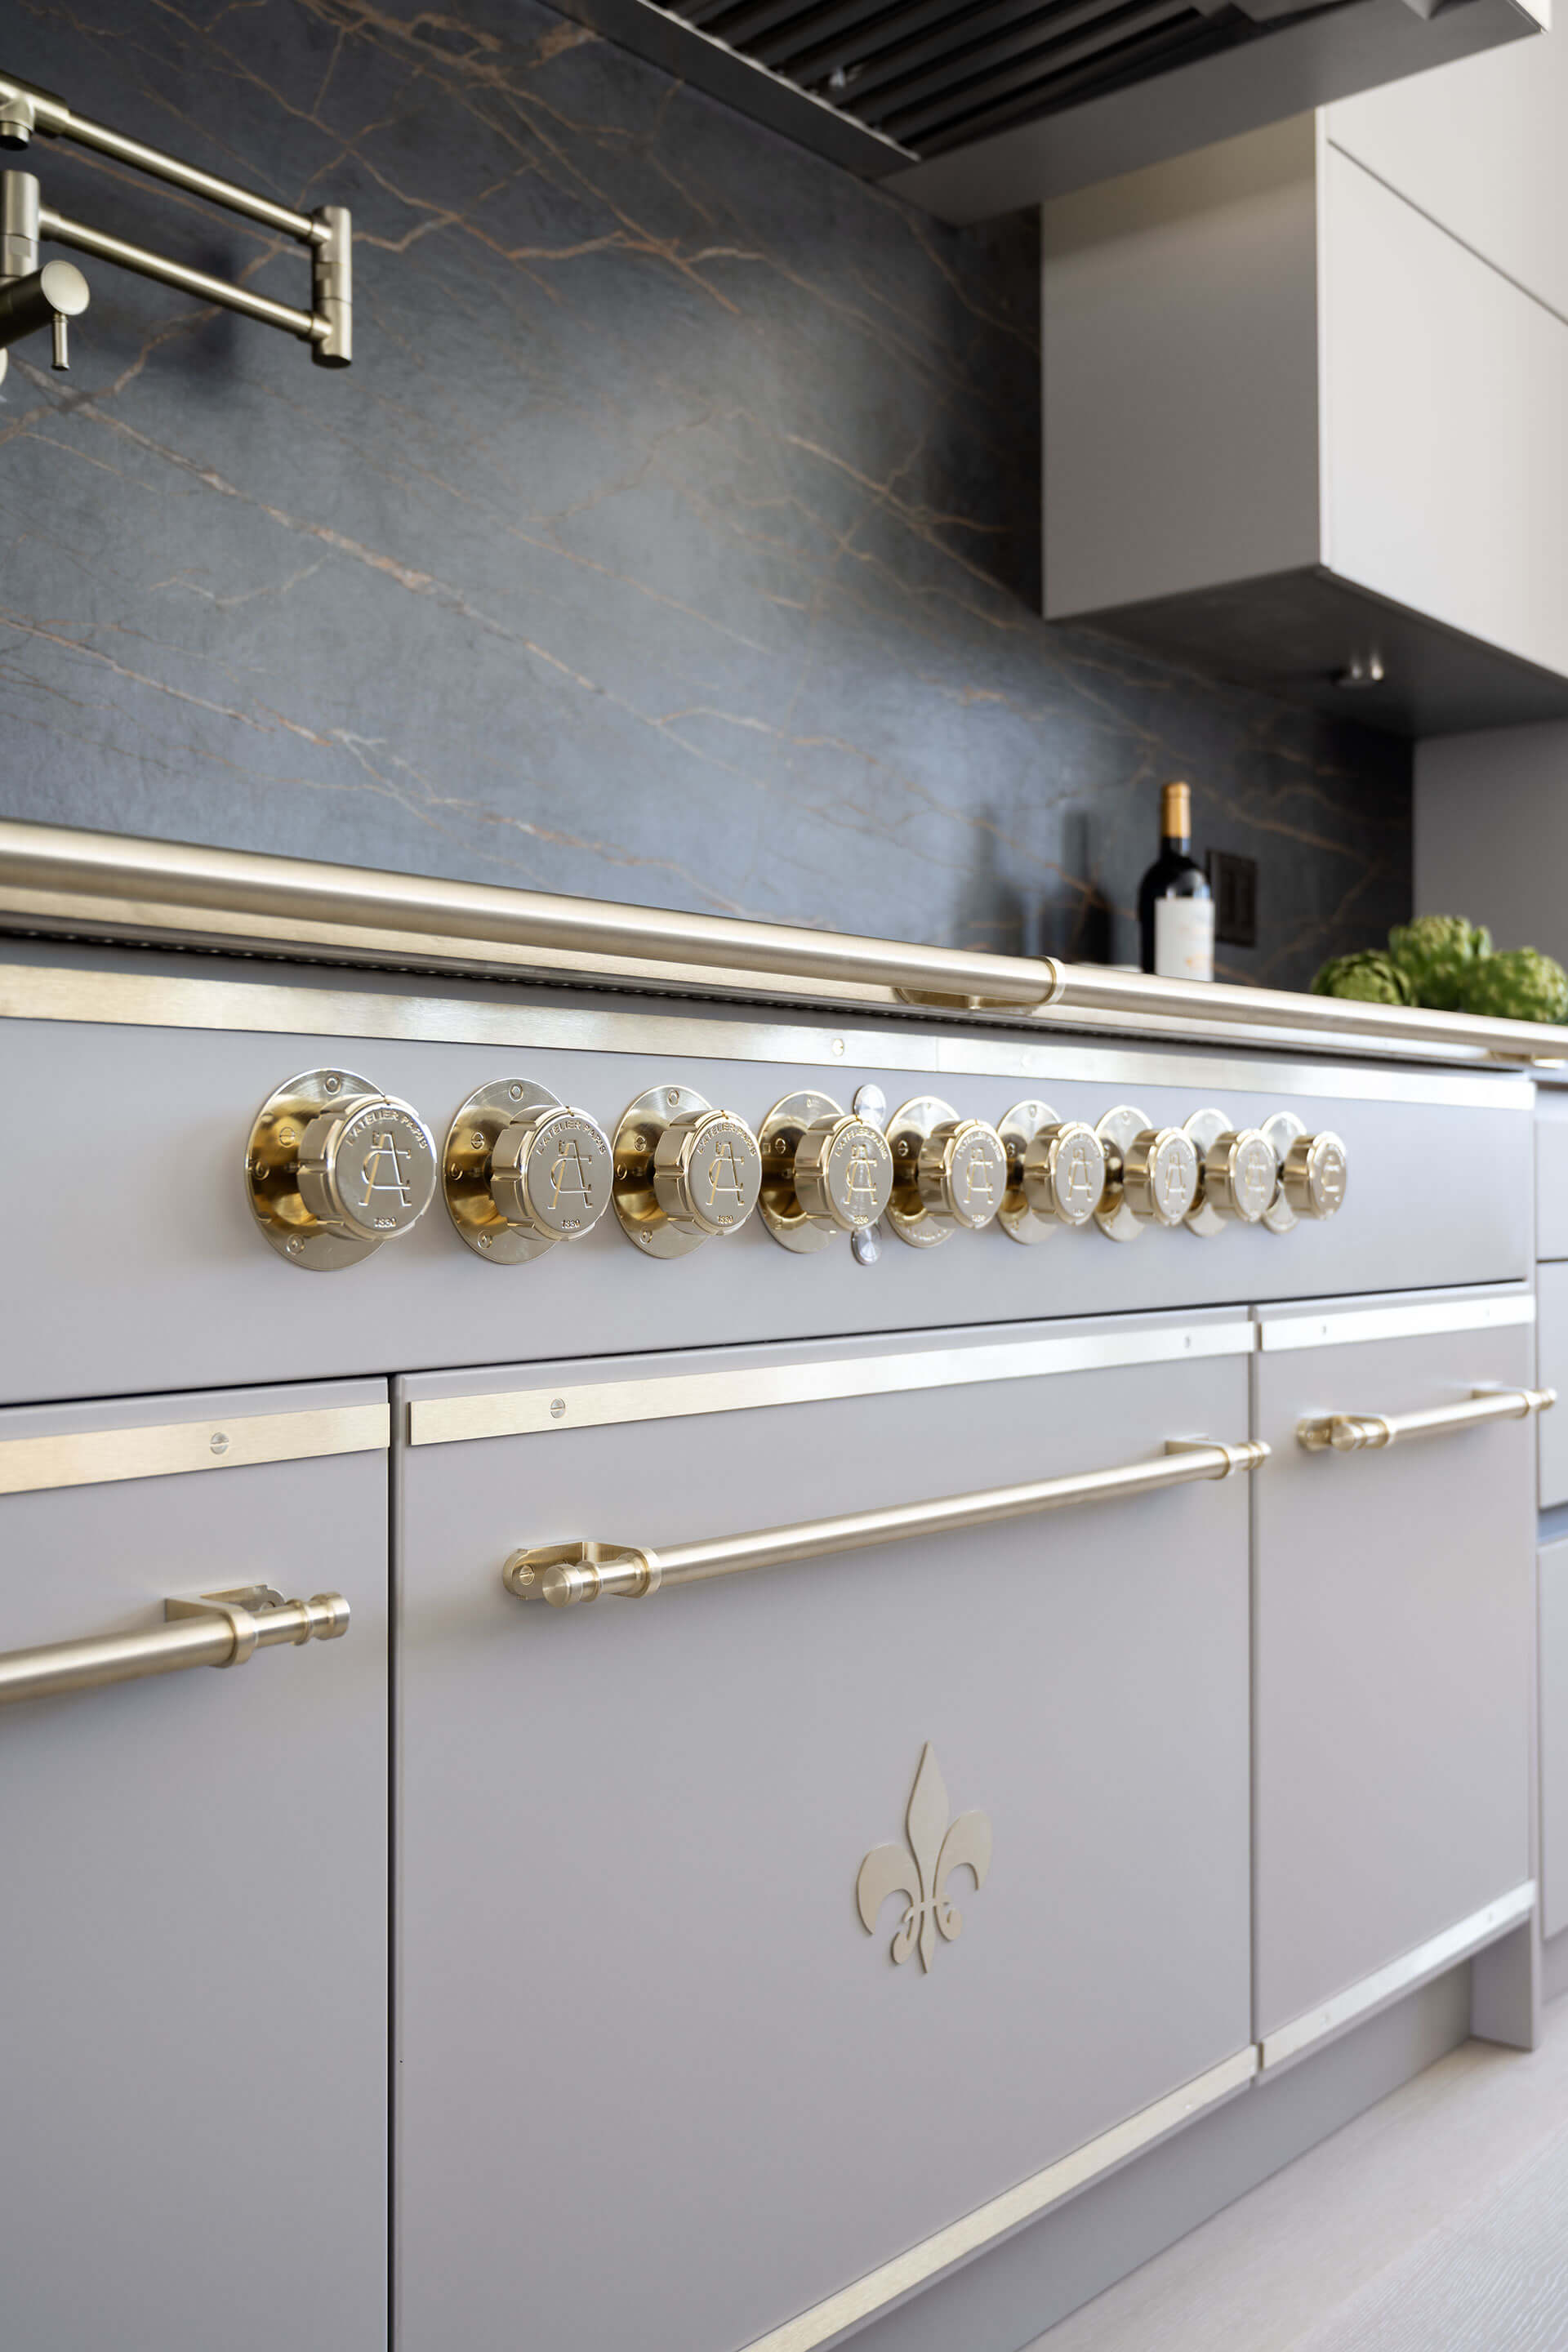 L’Atelier Paris French Kitchen Ranges in white color with golden burners and handles